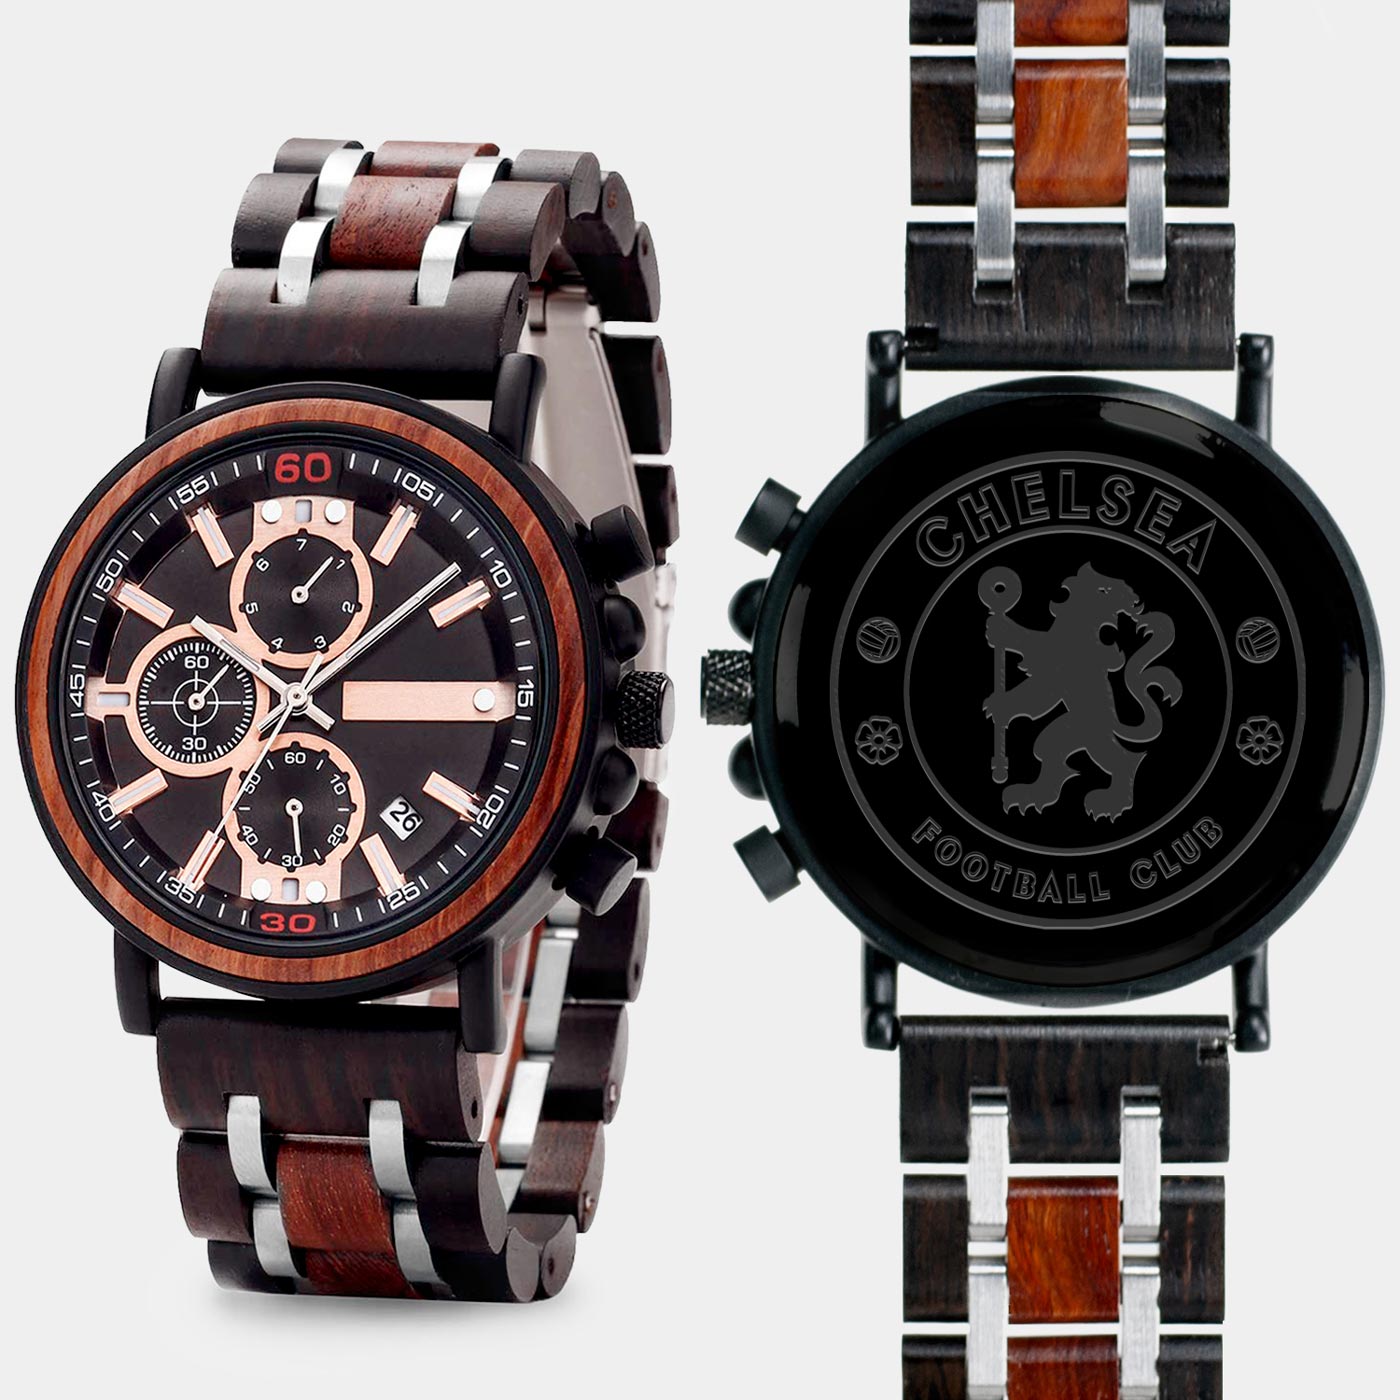 Chelsea F.C. Mens Wrist Watch  - Personalized Chelsea F.C. Mens Watches - Custom Gifts For Him, Birthday Gifts, Gift For Dad - Best 2022 Chelsea F.C. Christmas Gifts - Black 45mm FC Wood Watch